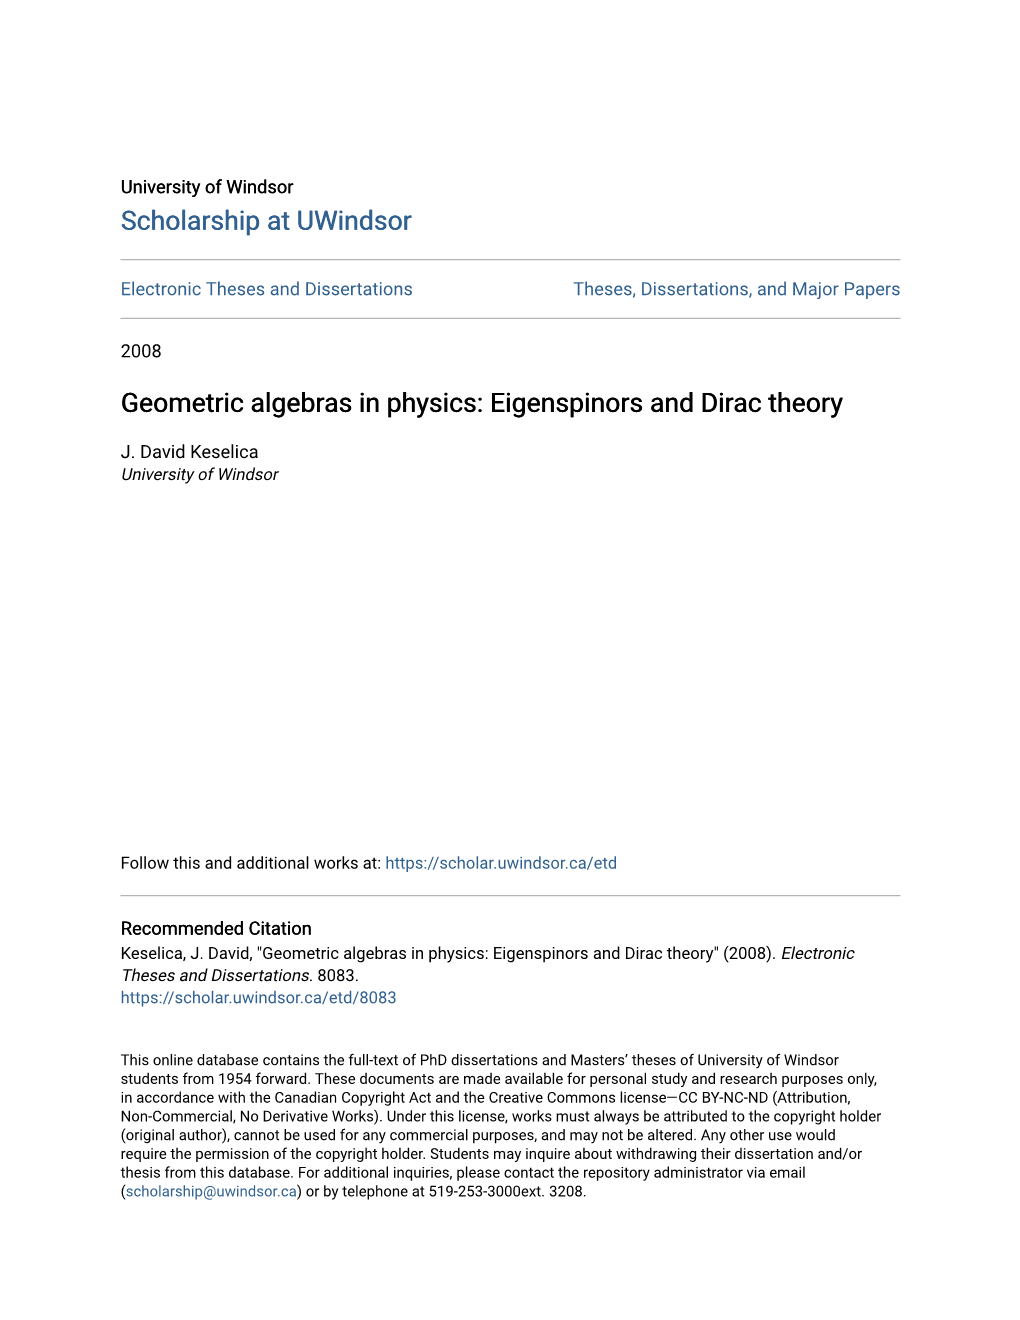 Geometric Algebras in Physics: Eigenspinors and Dirac Theory